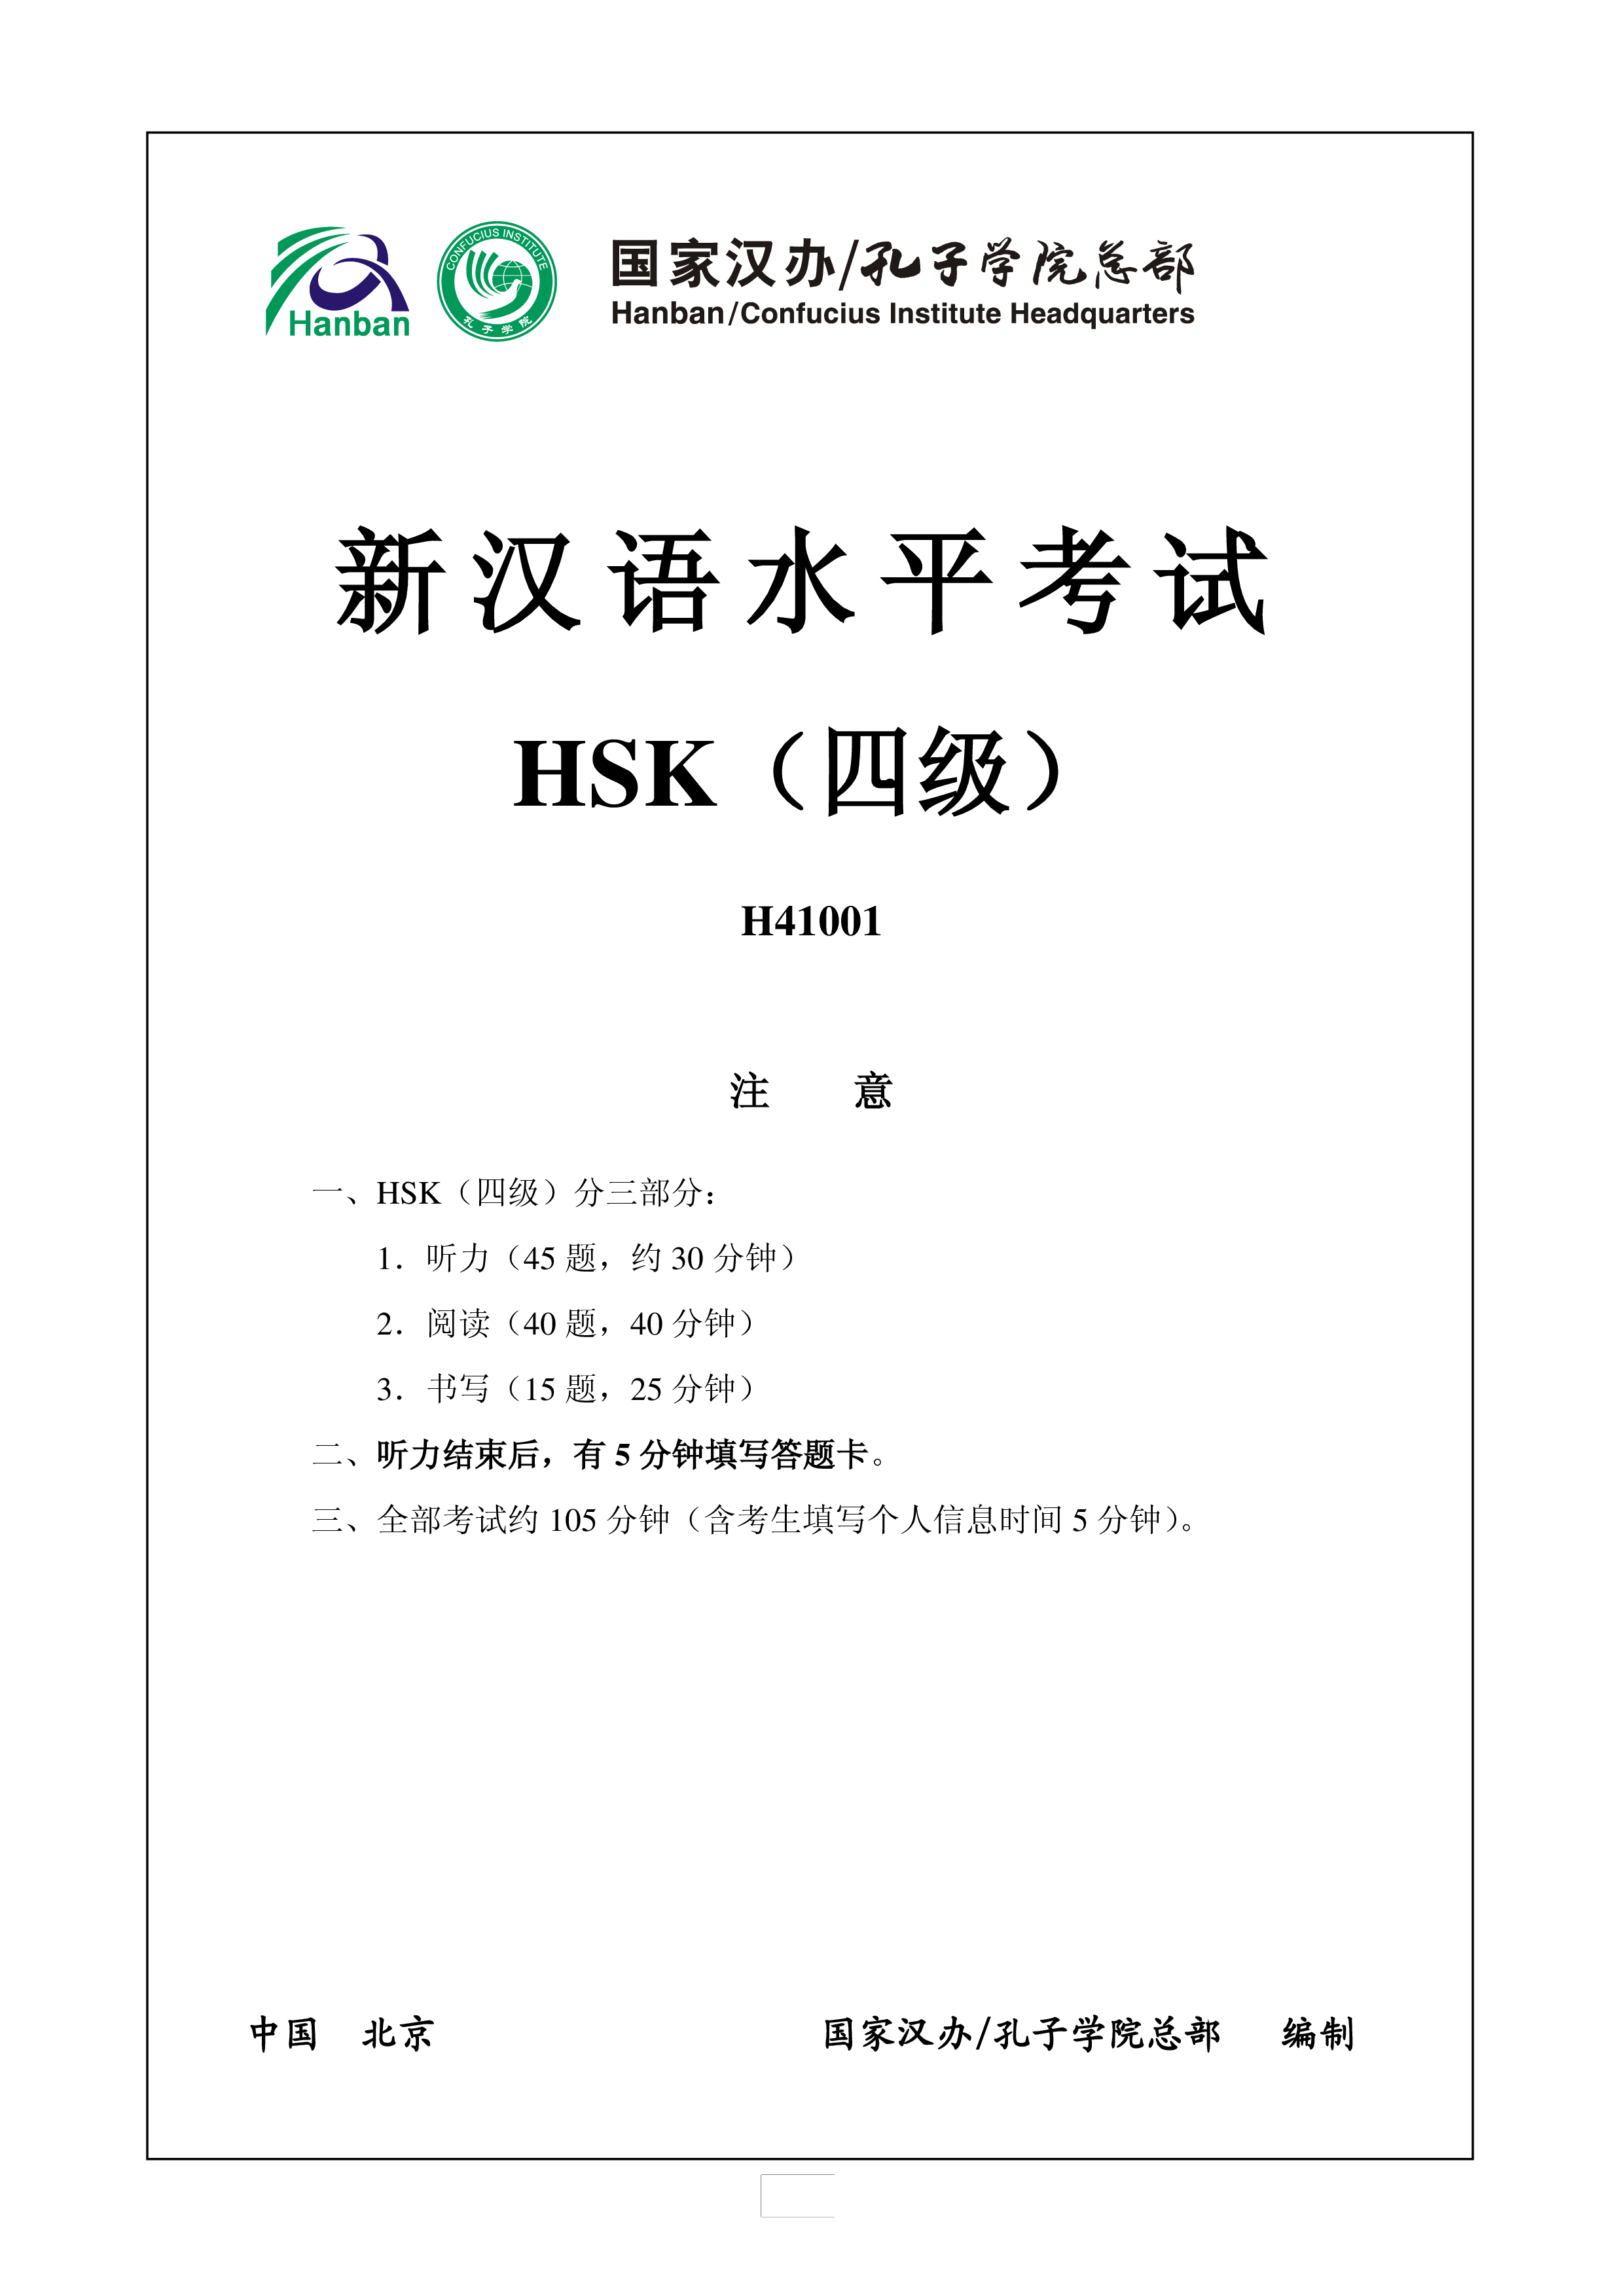 hsk4 chinese exam including answers # hsk h41001 voorbeeld afbeelding 